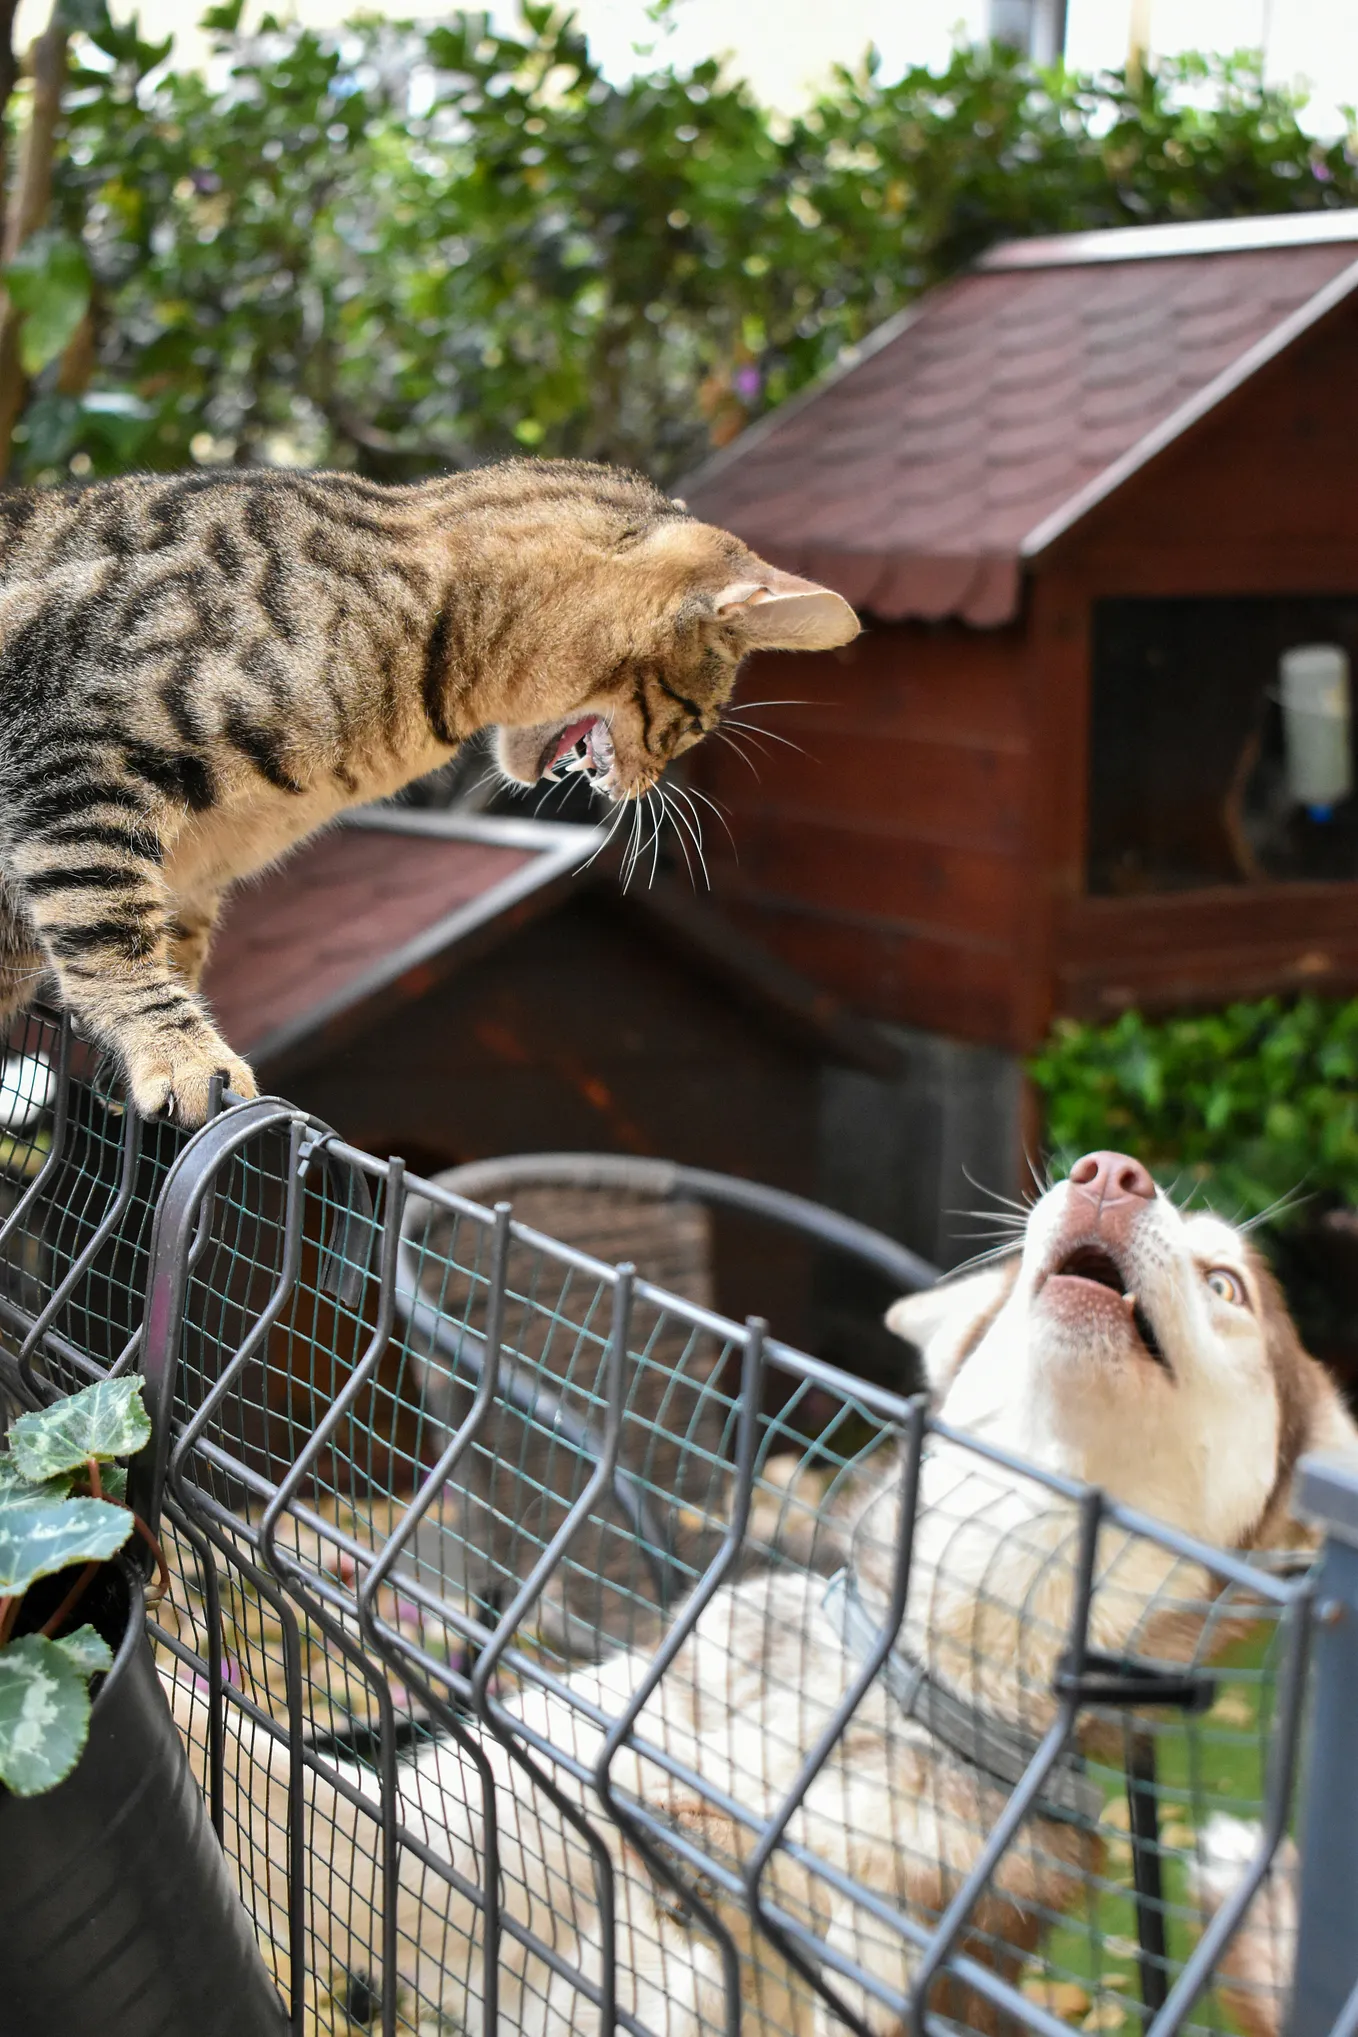 A cat on a fence hisses while looking down on a dog on the other side. The dog looks startled and afraid.